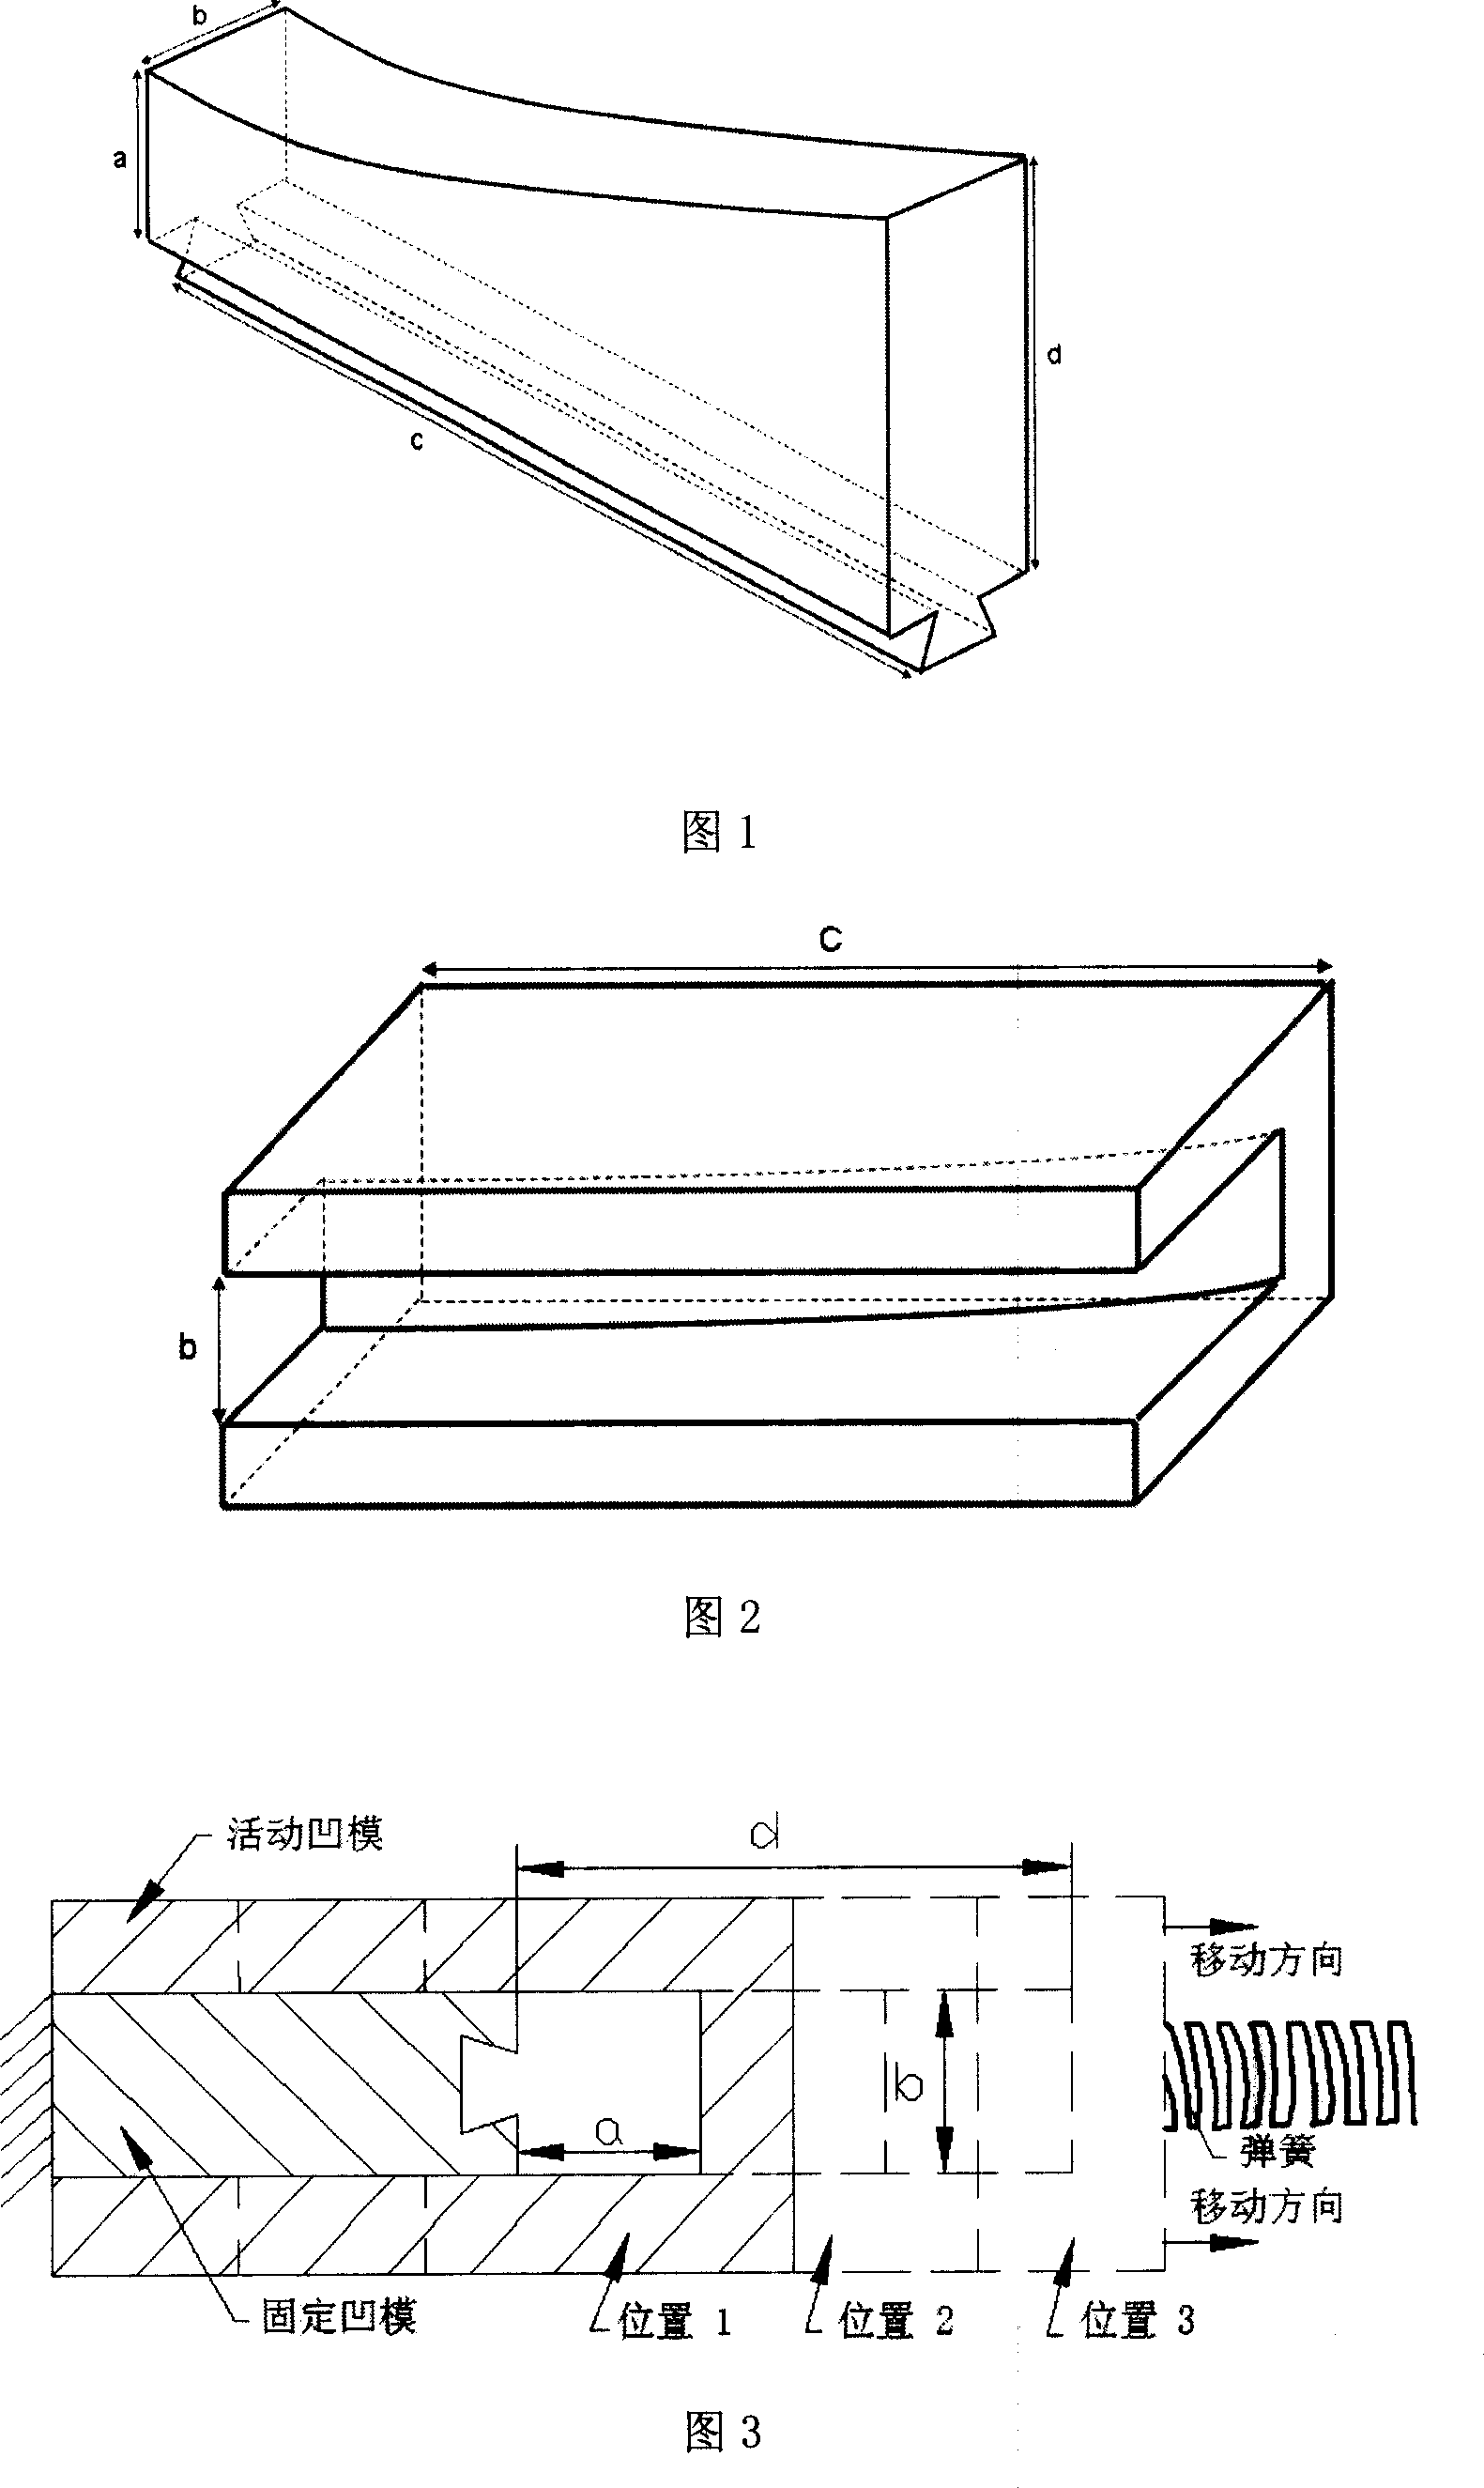 Semi-solid state flexible extrusion molding technique for shaped complex parts